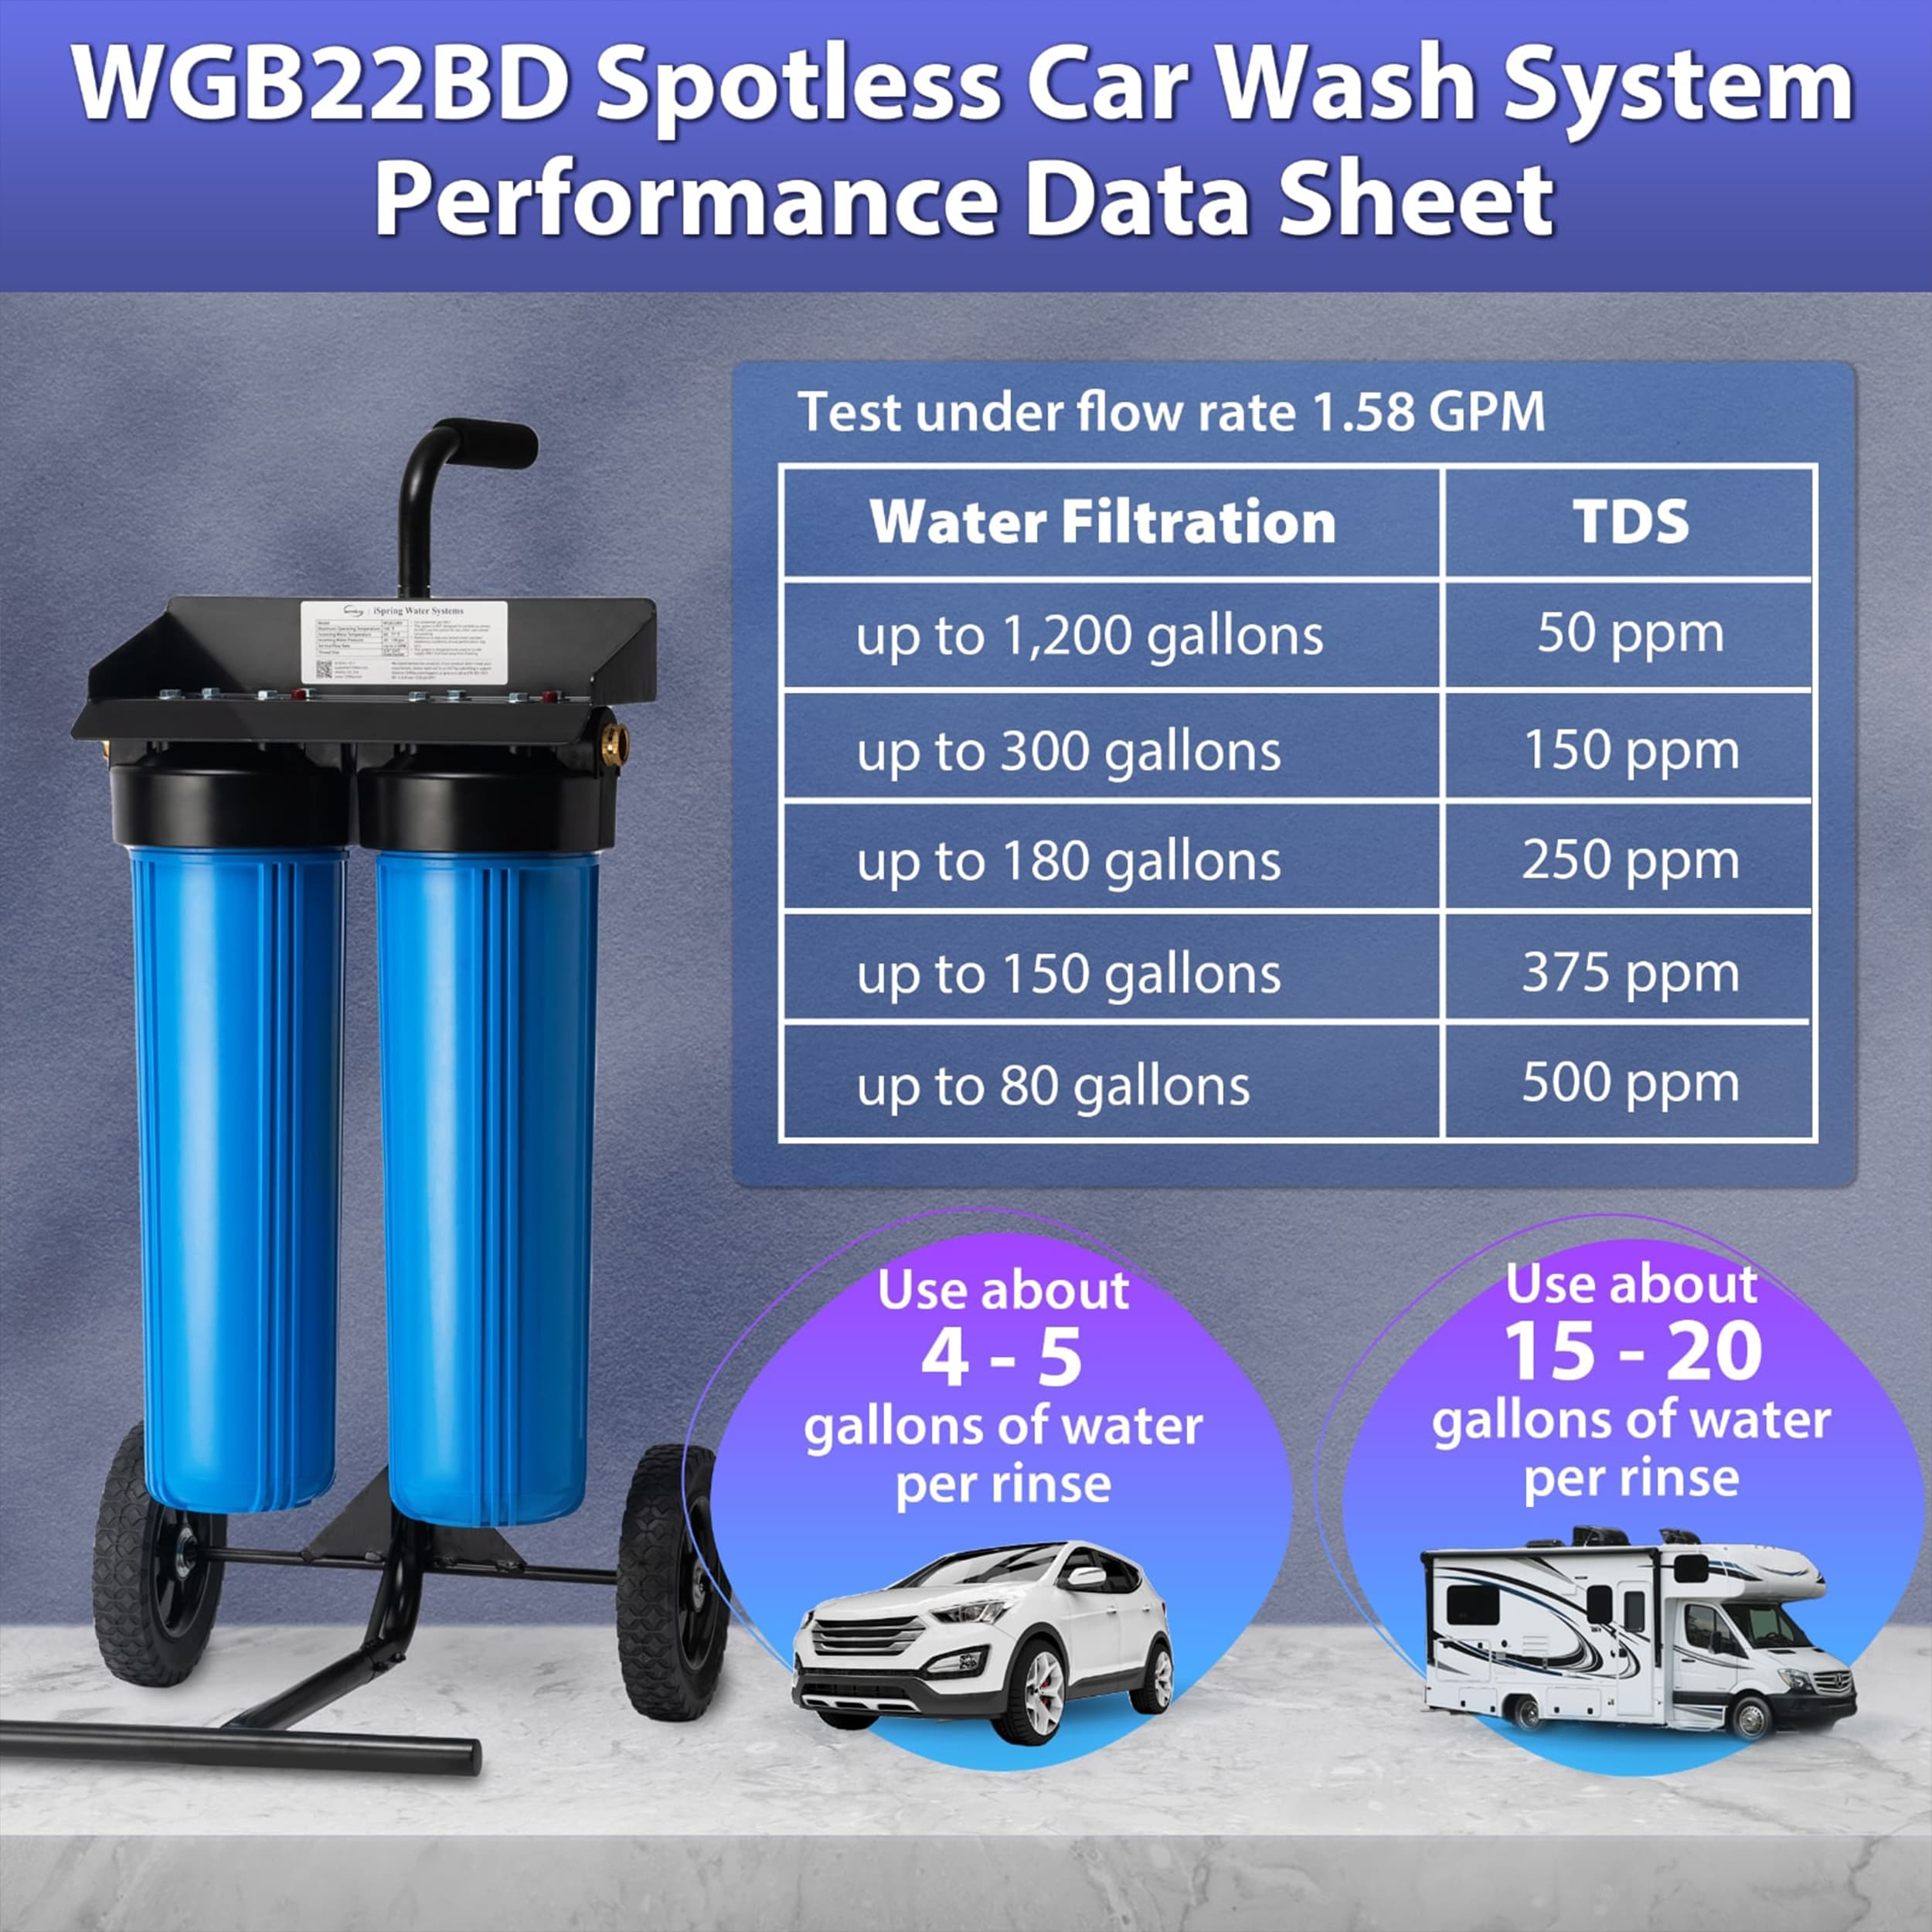 iSpring WGB22BD Deionized Water System - Spotless Car Wash Kit, Filtered  Water, Easy DIY Installation, Lasts Up to 12 Months